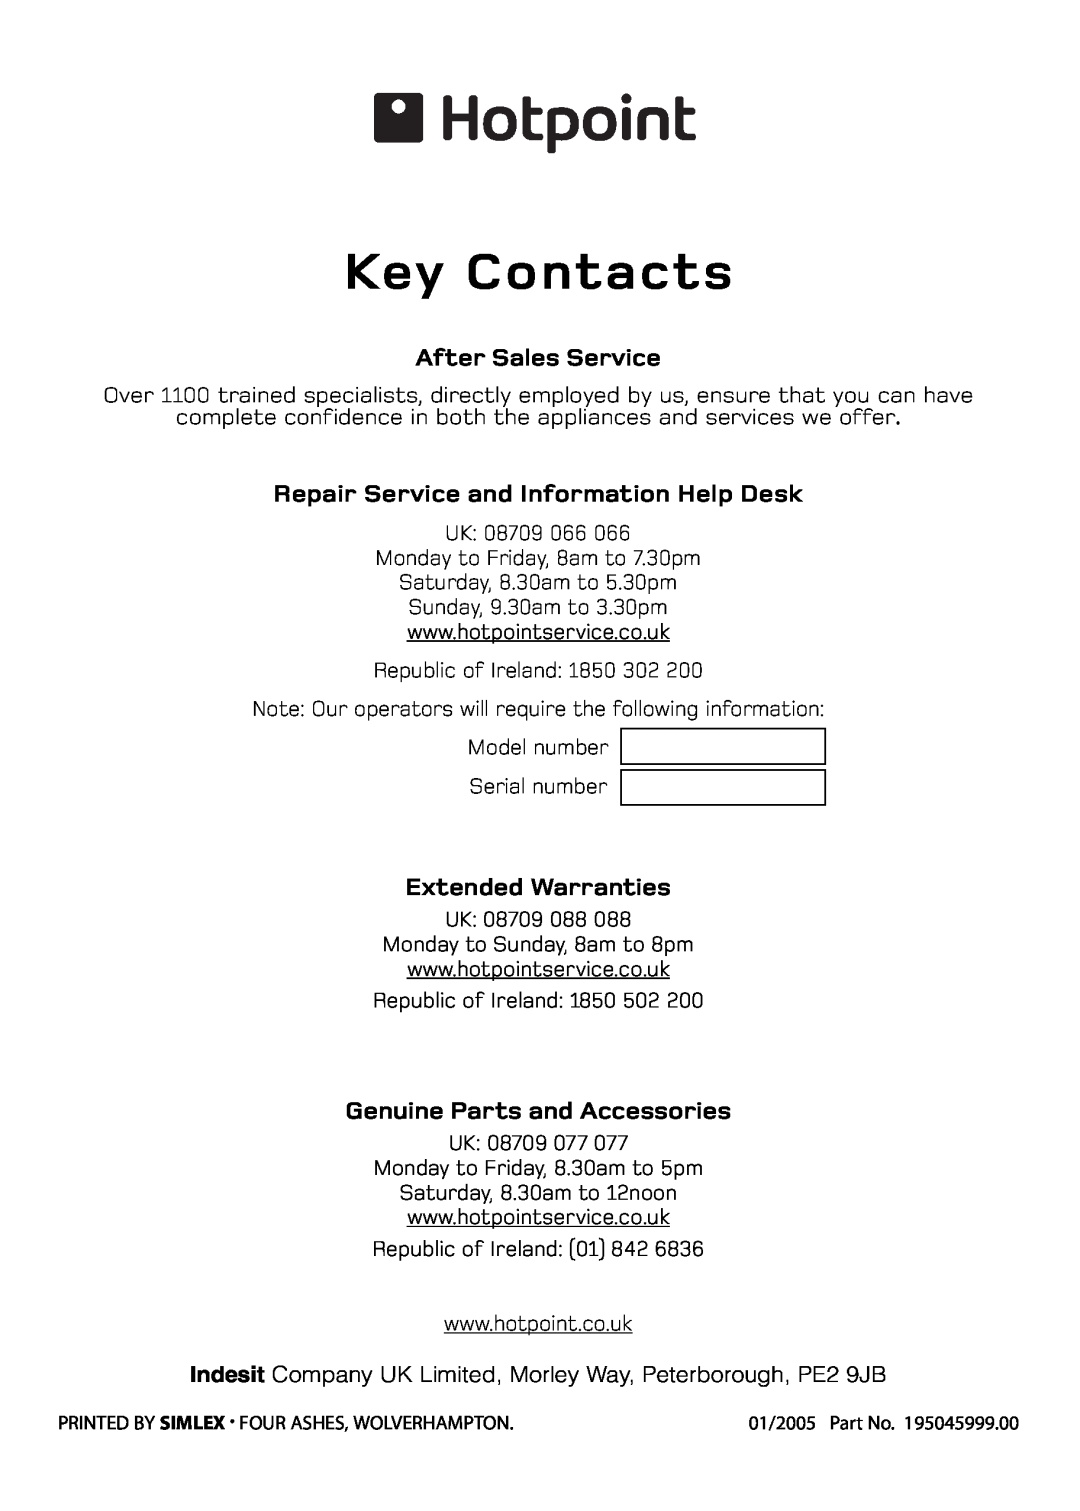 Hotpoint S420E manual Key Contacts, After Sales Service, Repair Service and Information Help Desk, Extended Warranties 